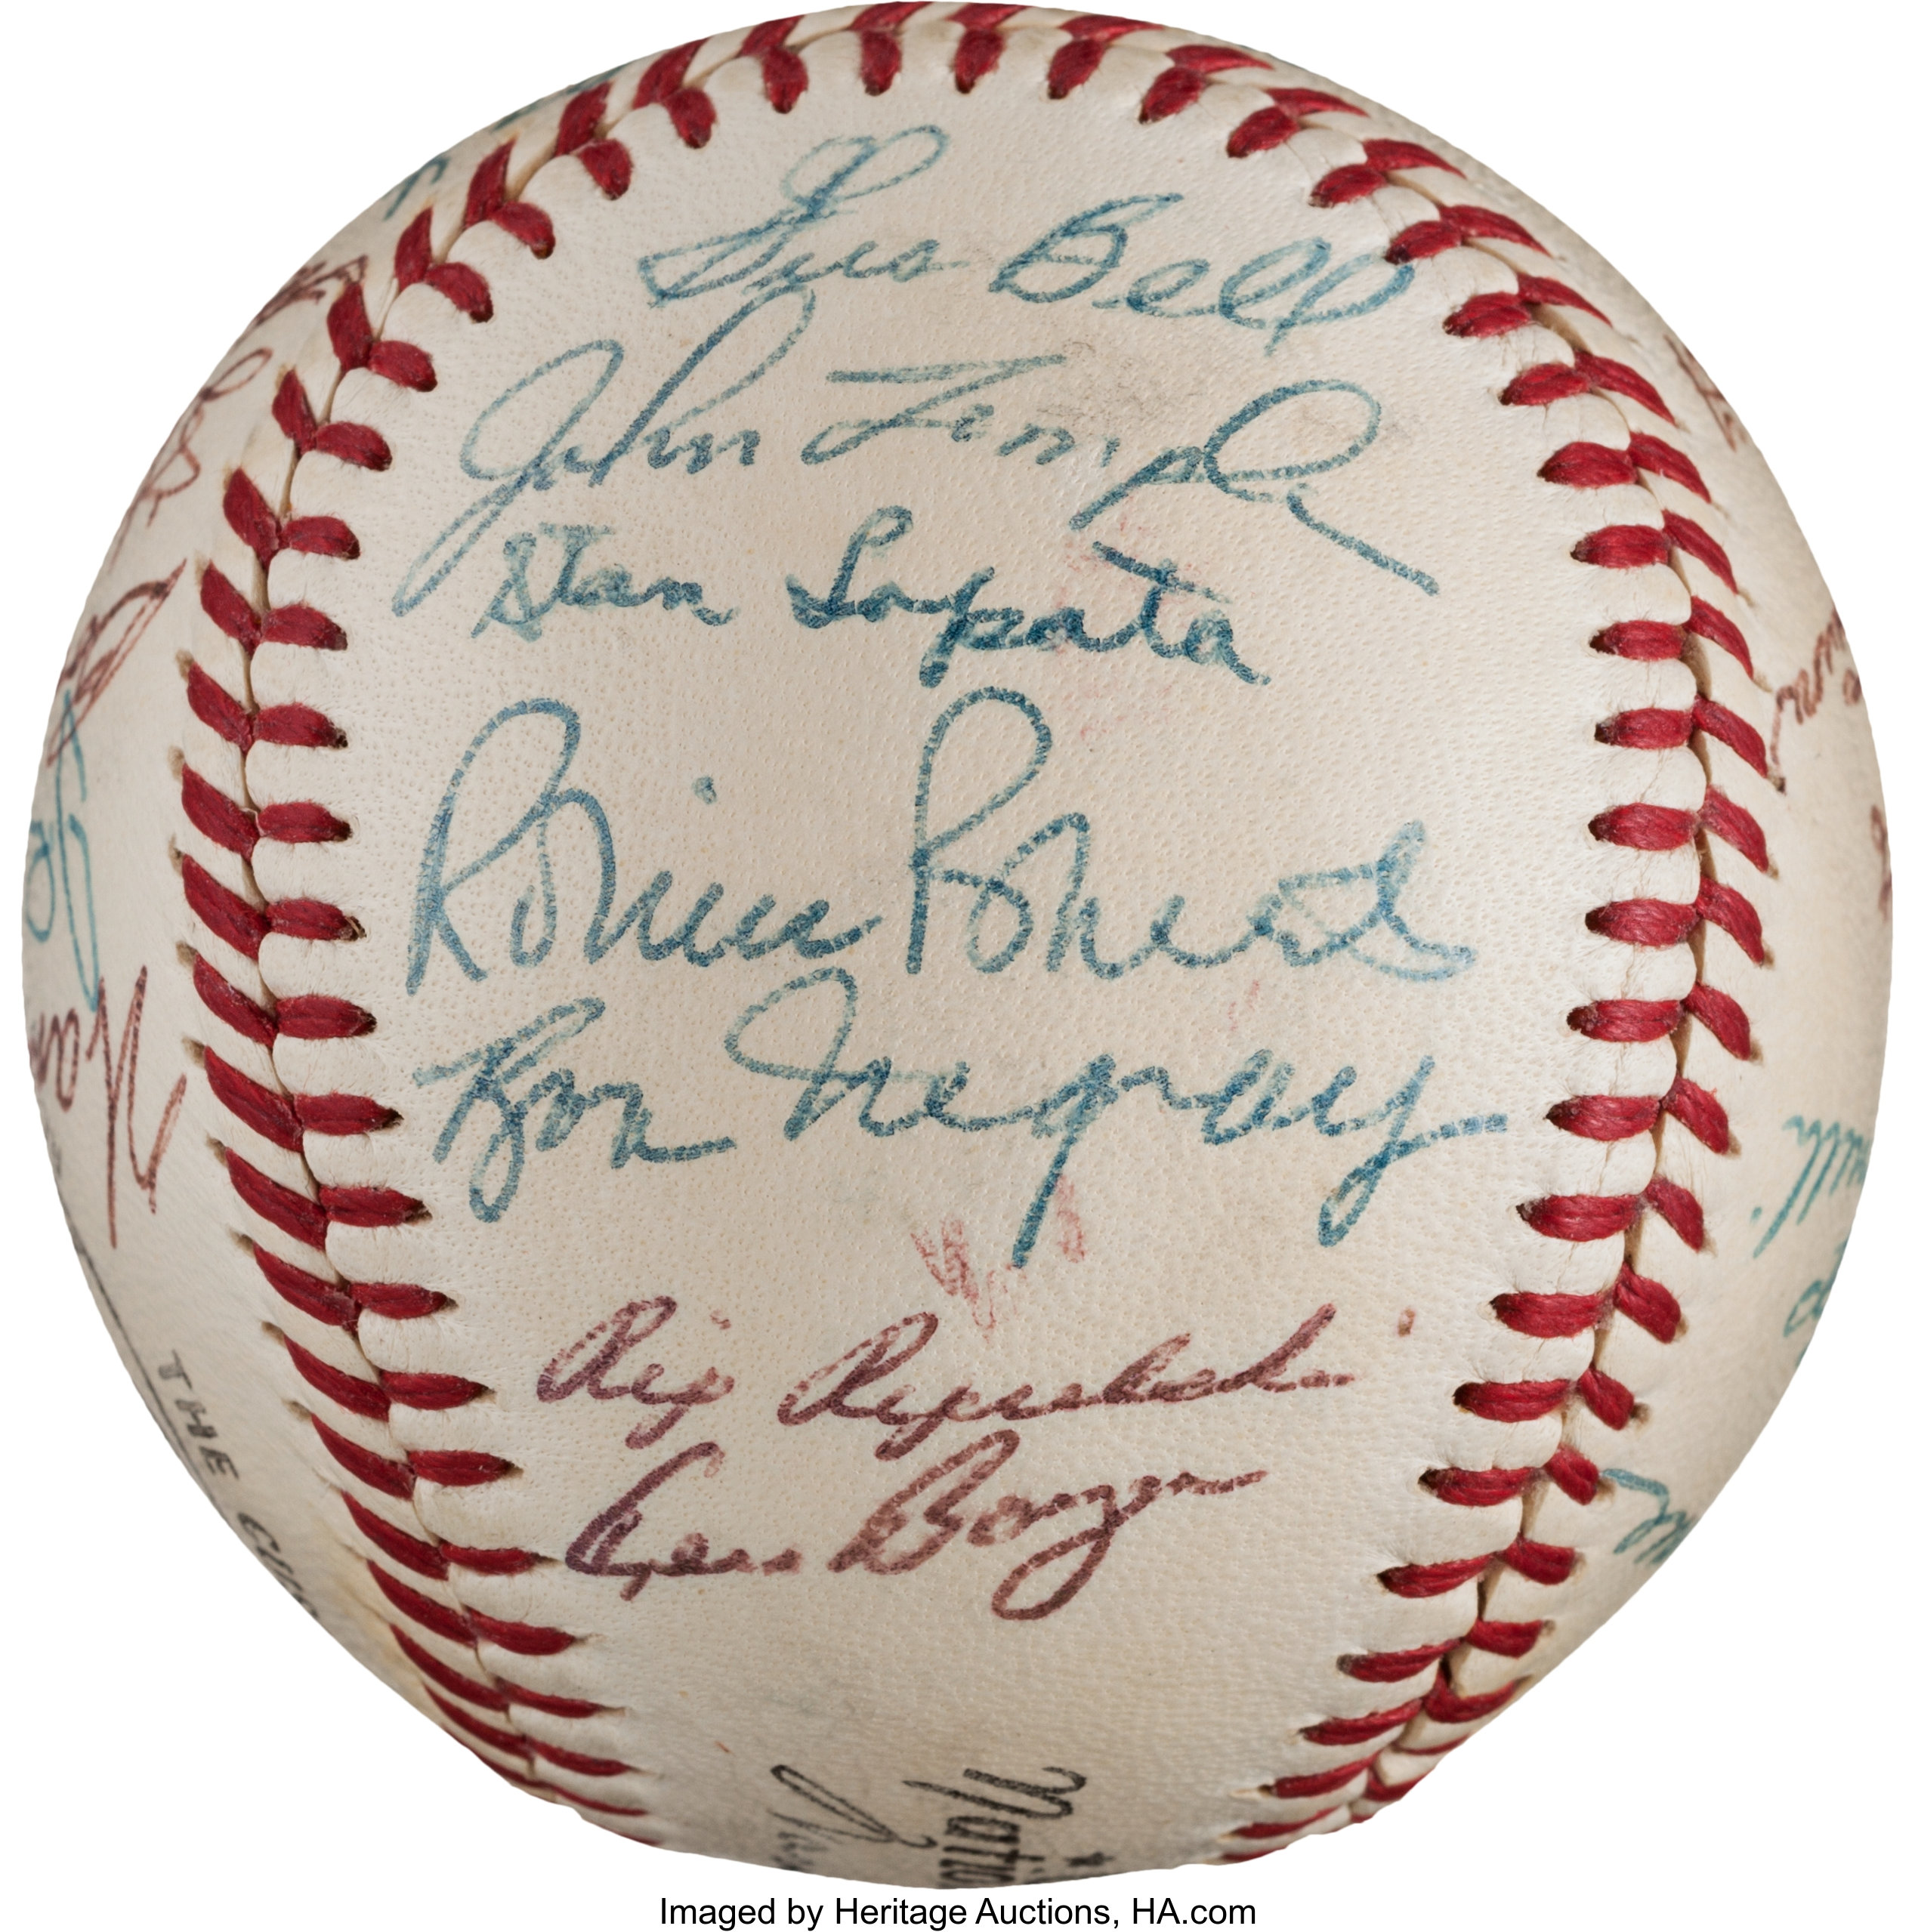 1956 National League All-Star Team Signed Baseball from The Stan